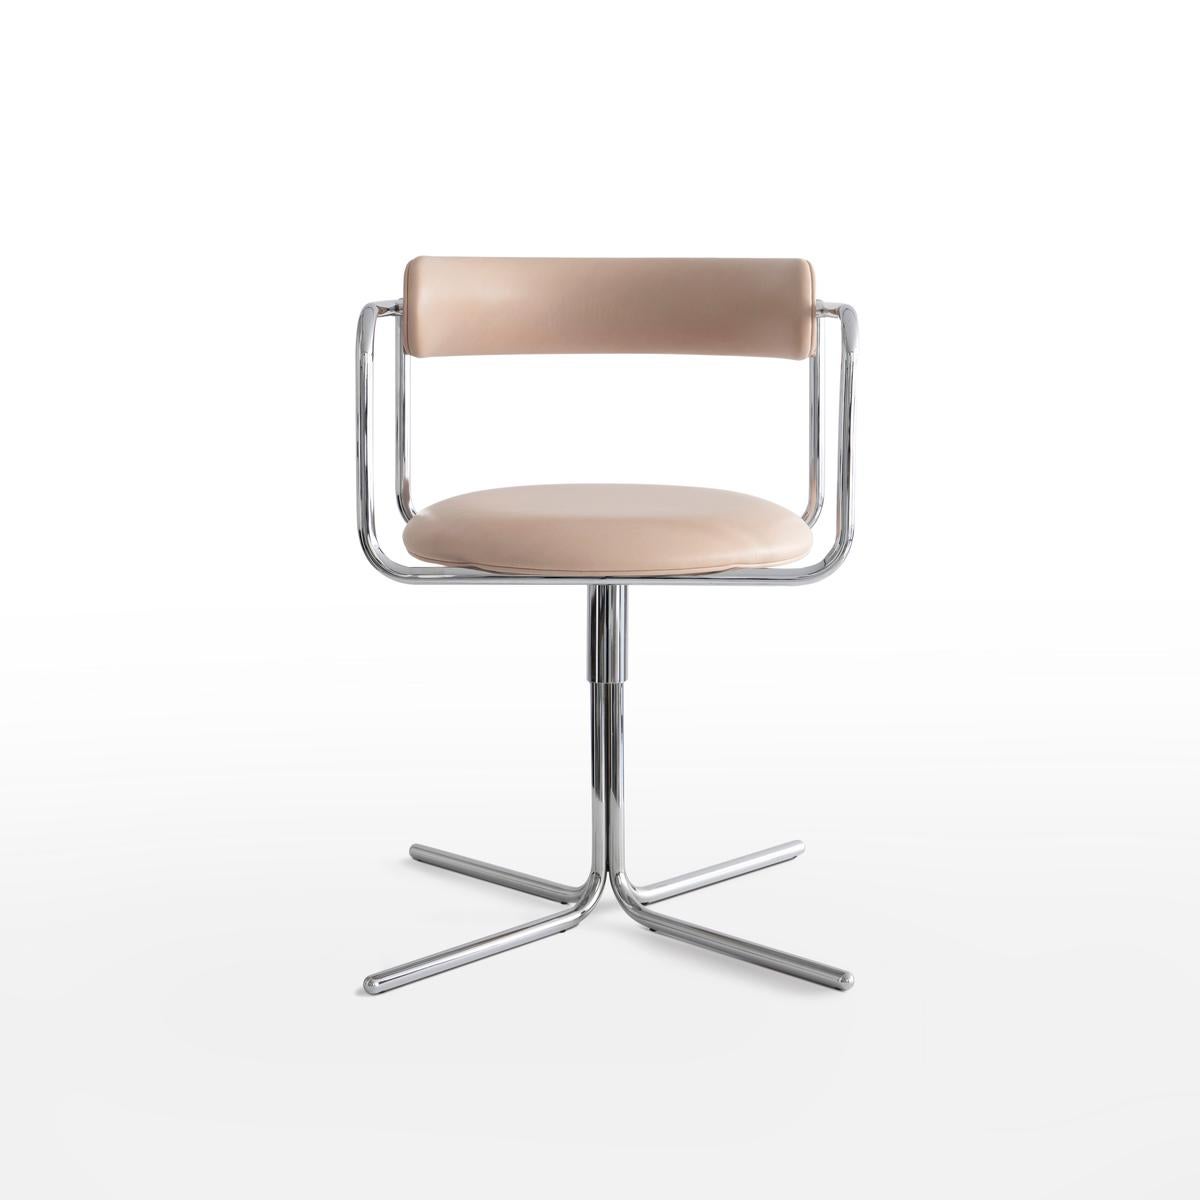 Organic Modern Contemporary Chair 'FF Swivel' Chrome and Leather, Cognac For Sale